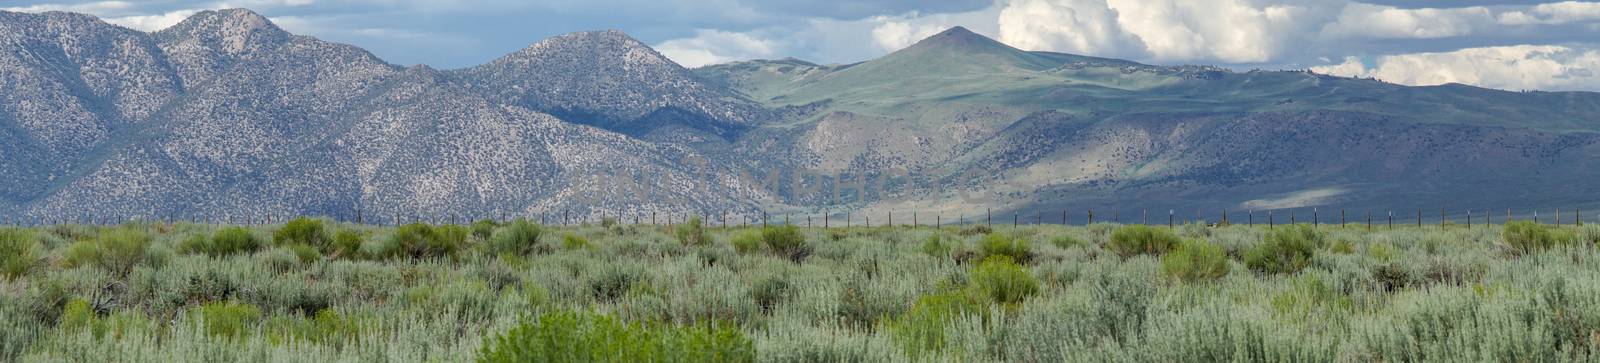 Green wild land with sagebrush plant and mountain in the background next the Lake Crowley, Eastern Sierra, Mono County, California, USA. 